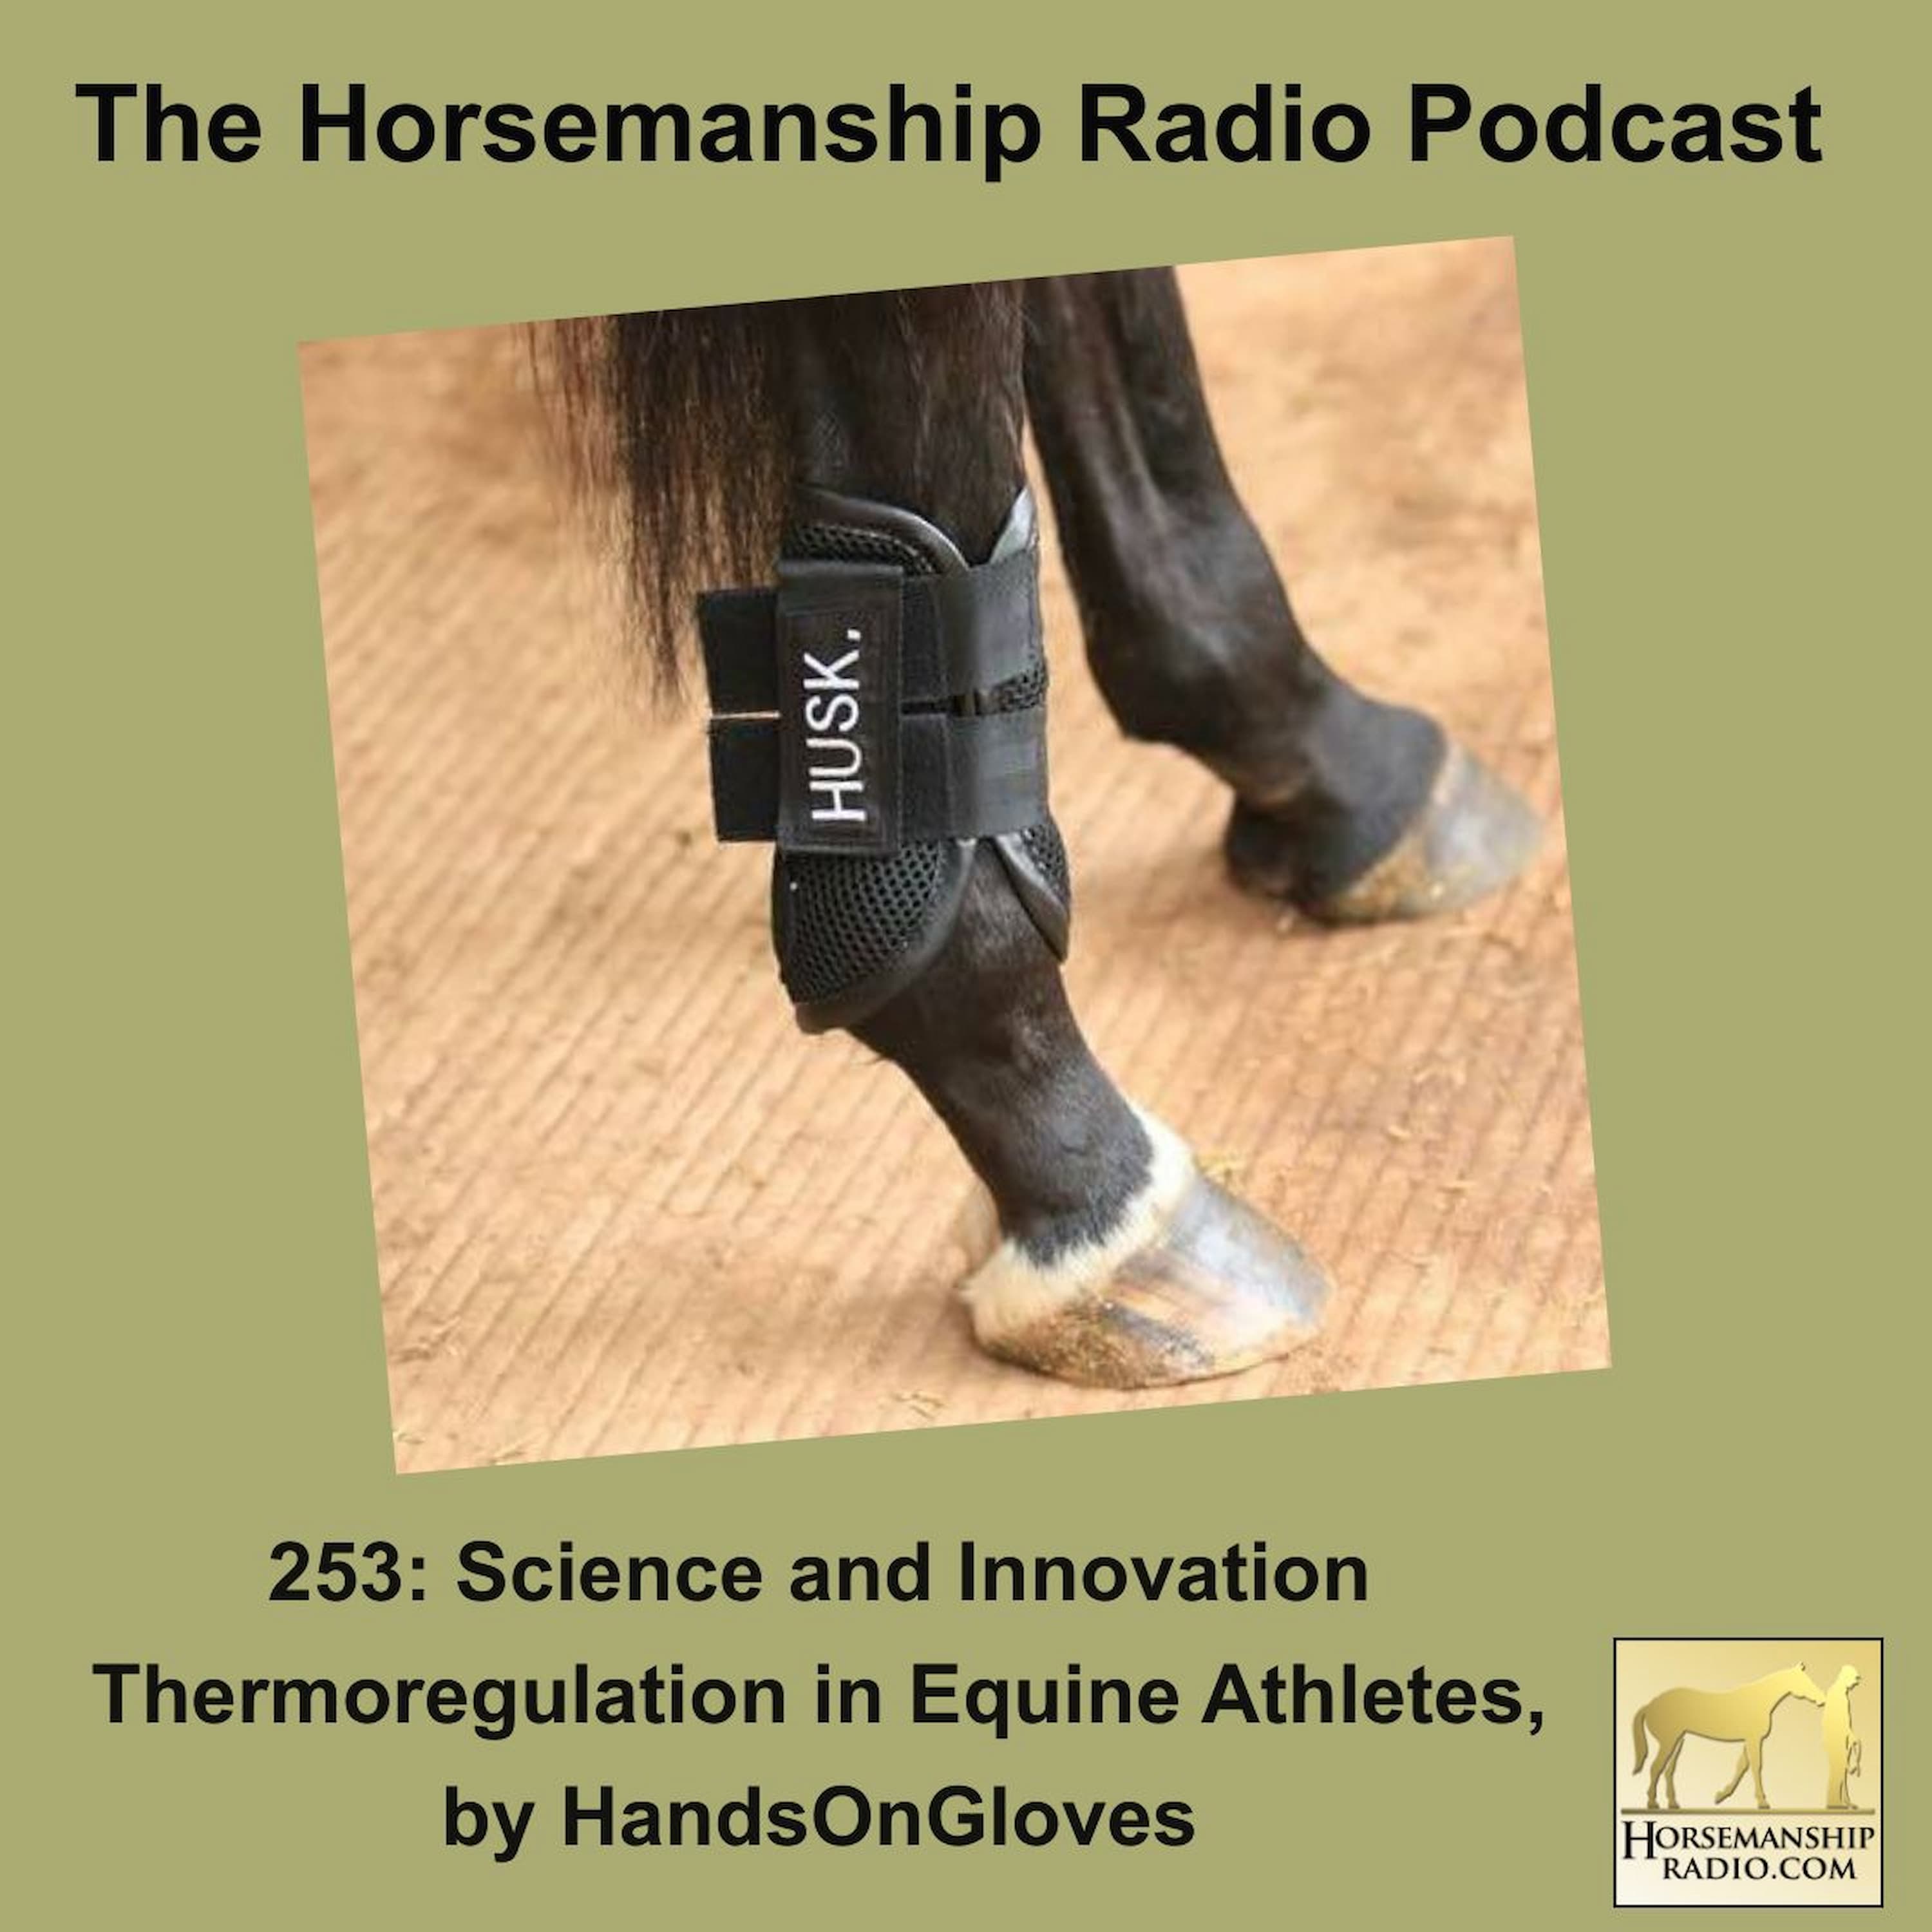 253: Science and Innovation Thermoregulation in Equine Athletes, by HandsOnGloves